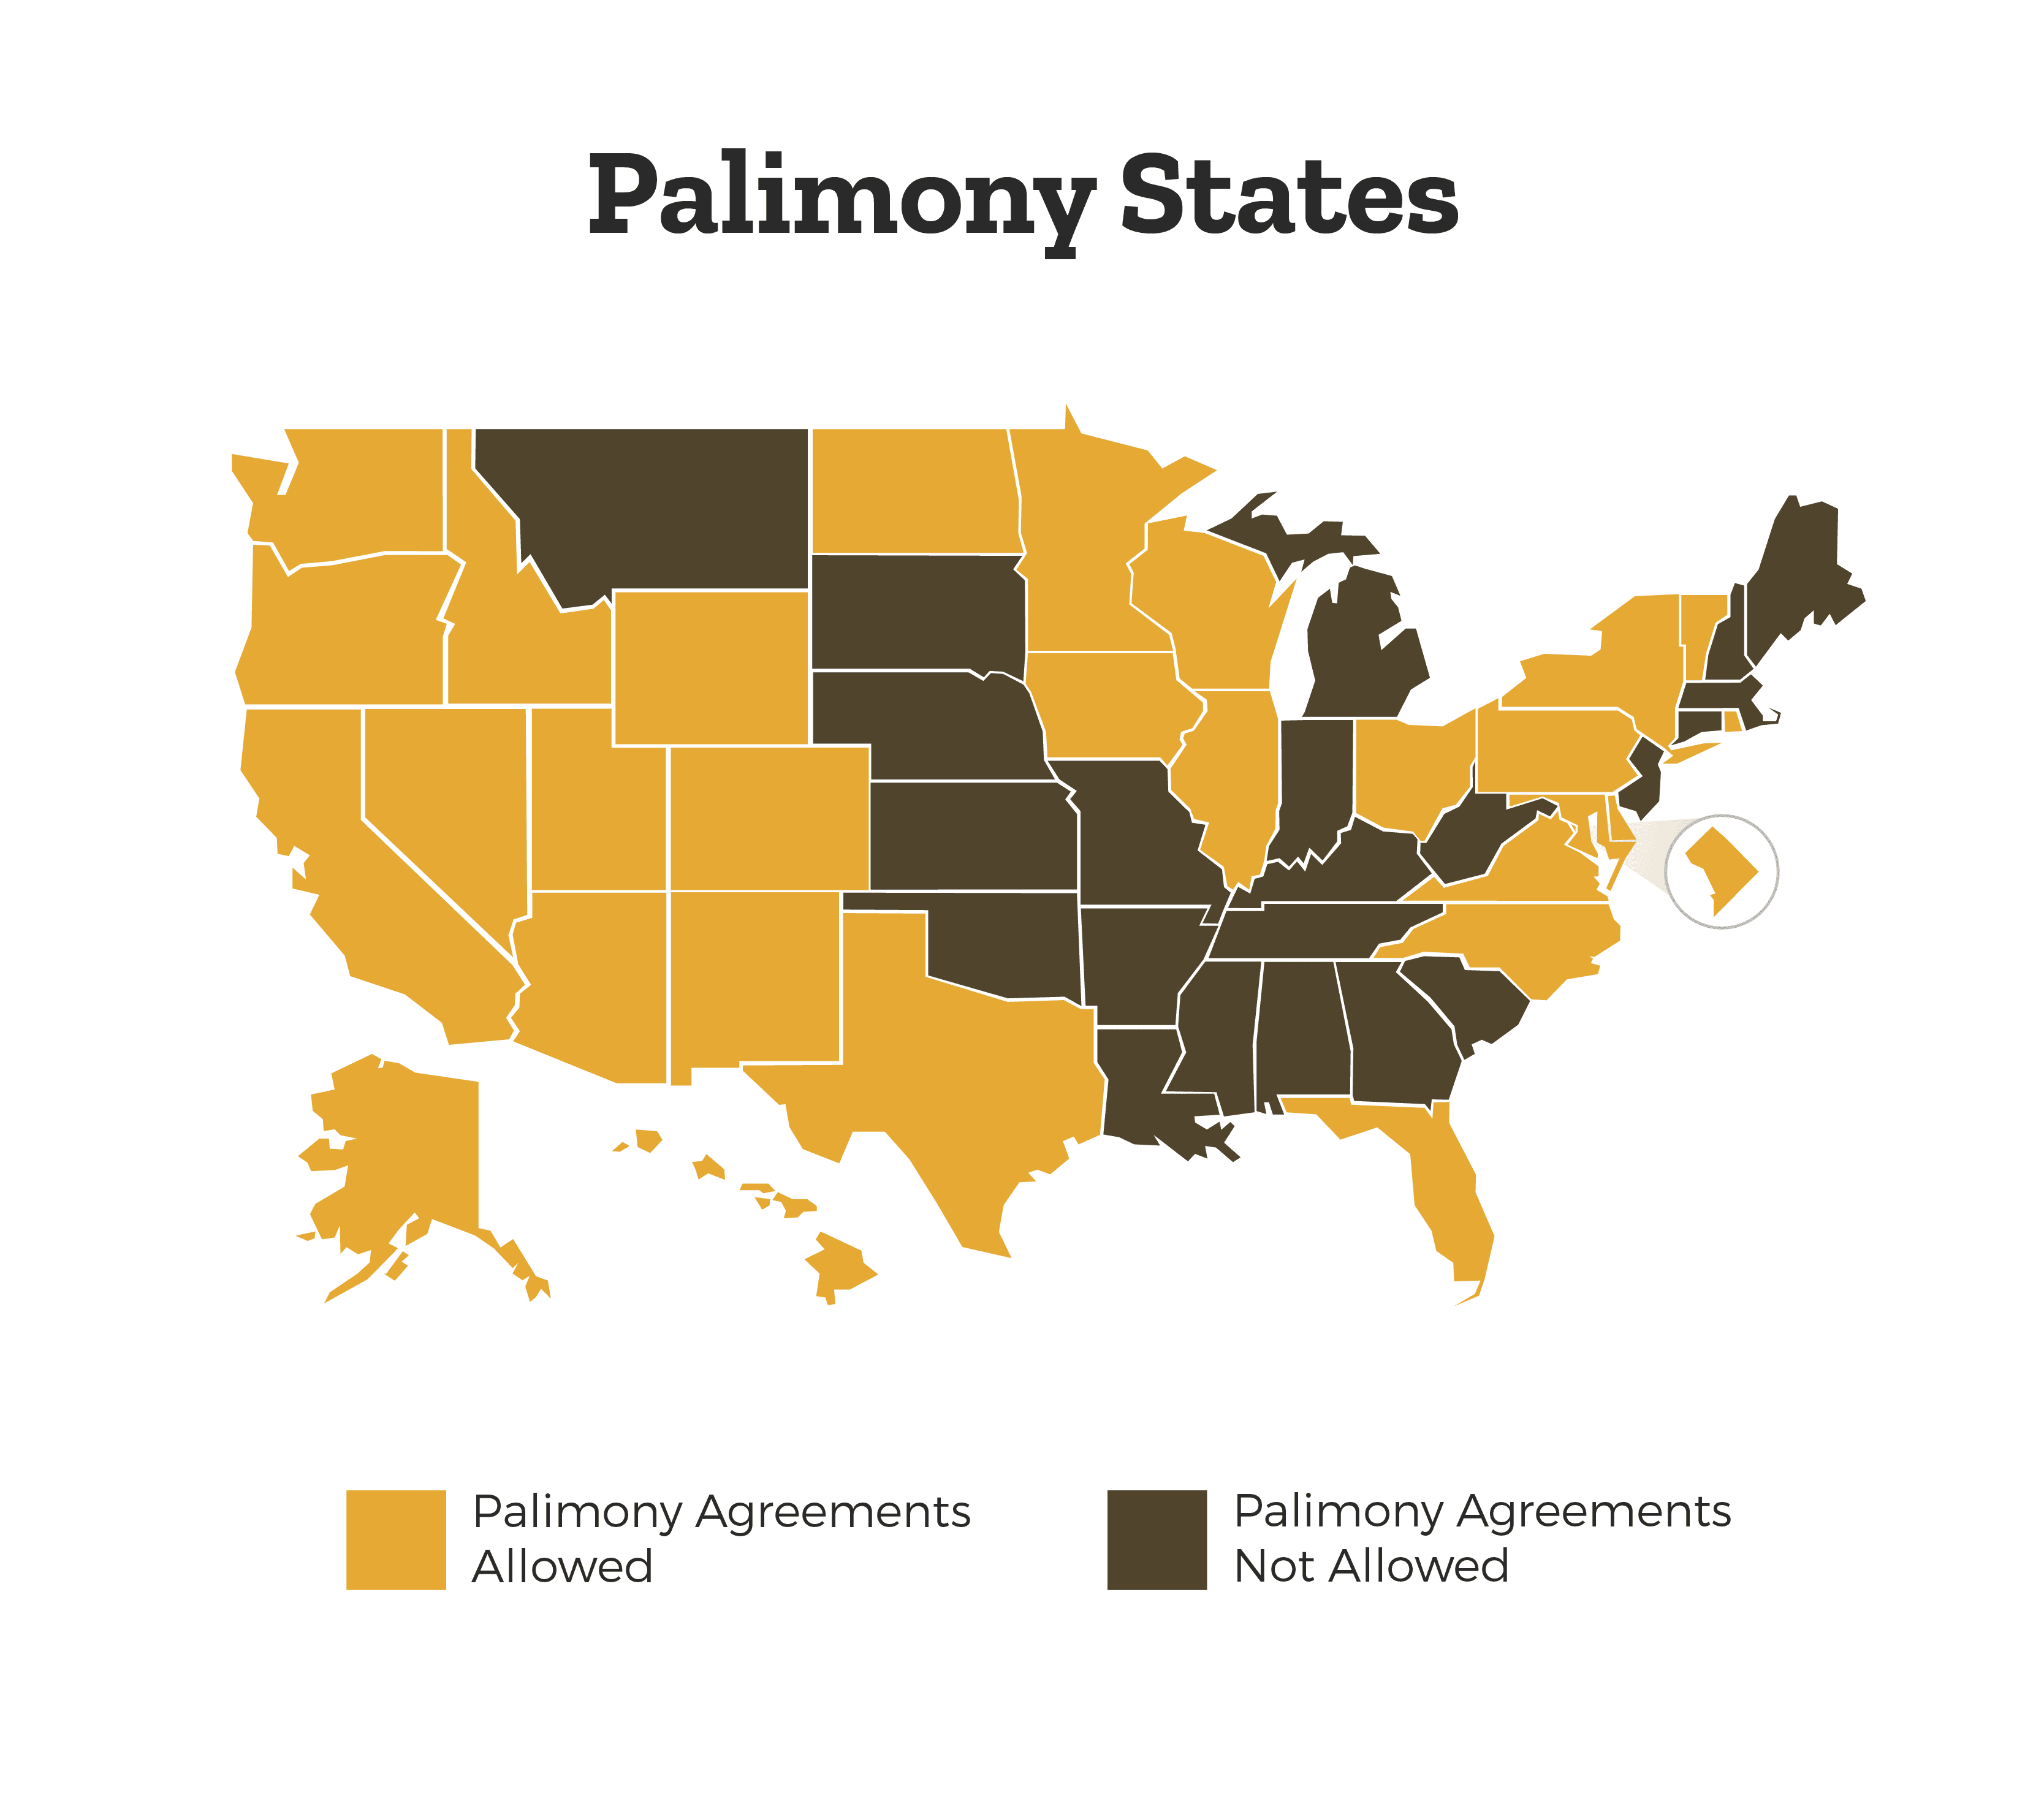 A map of the United States of America that is color coded to represent which states allow palimony agreements and which states do not allow palimony agreements.